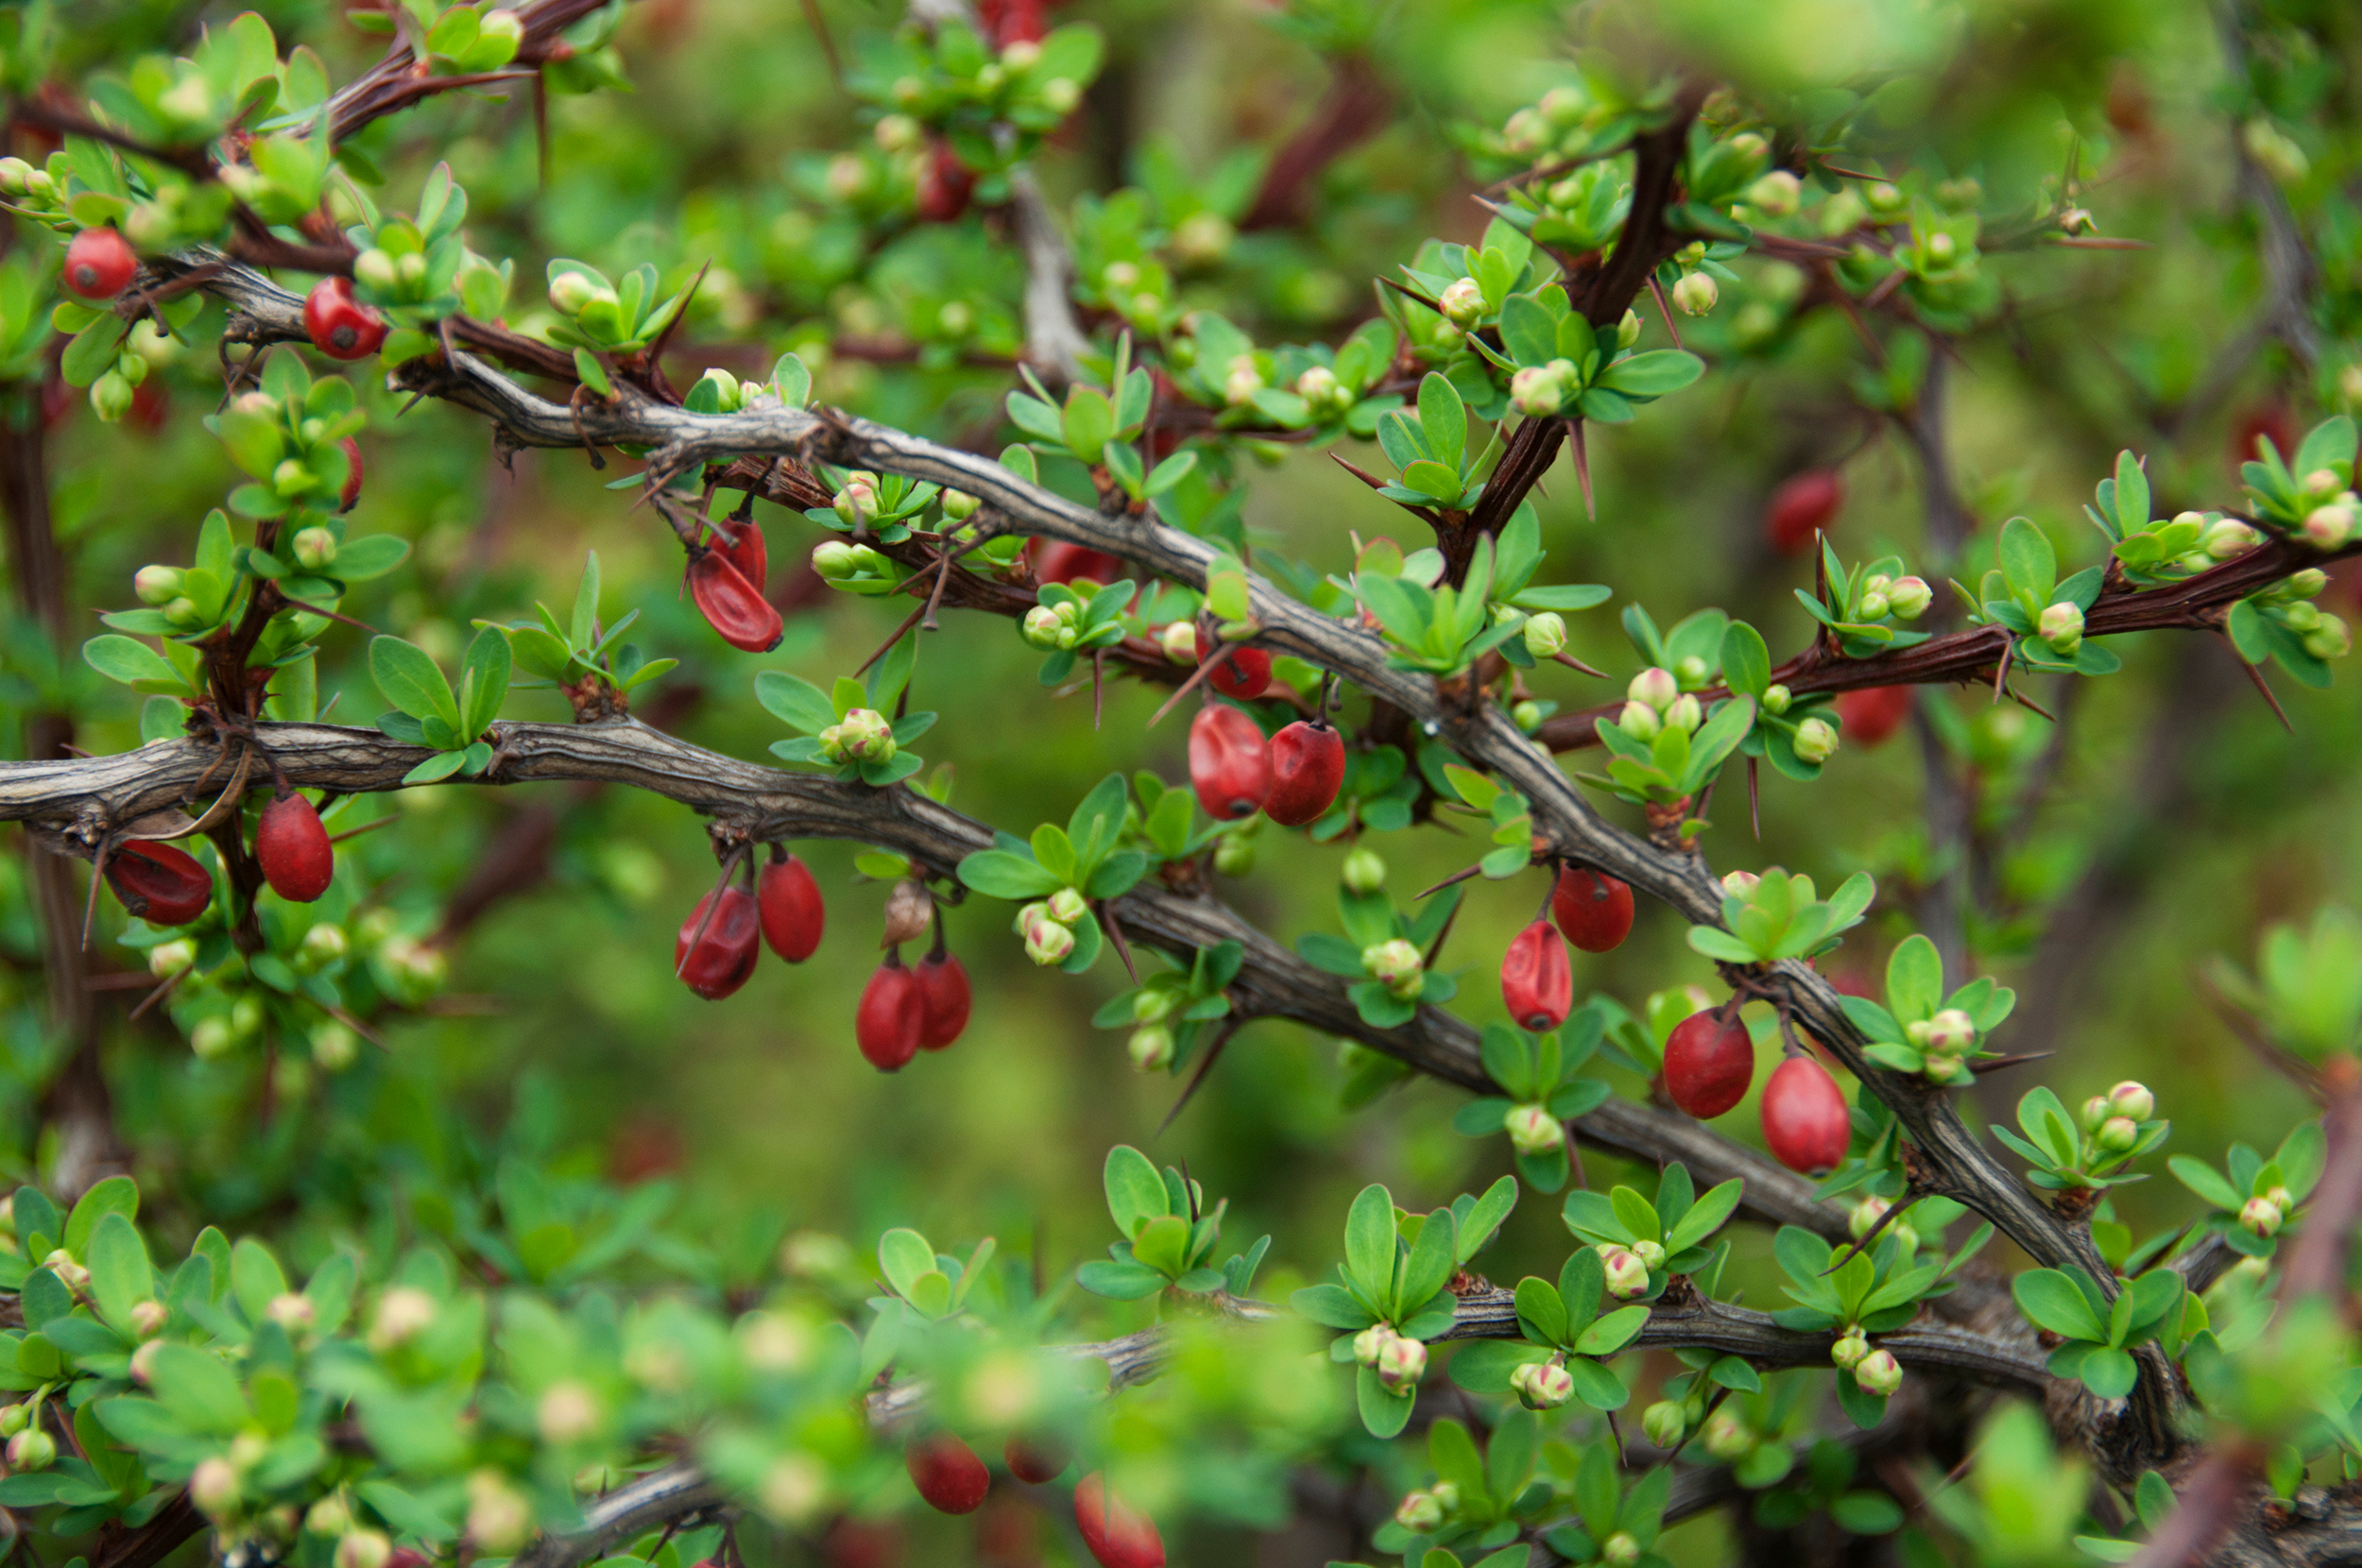 Japanese barberry (Berberis thunbergii) with new leaves, flower buds, and berries. (Getty Images)